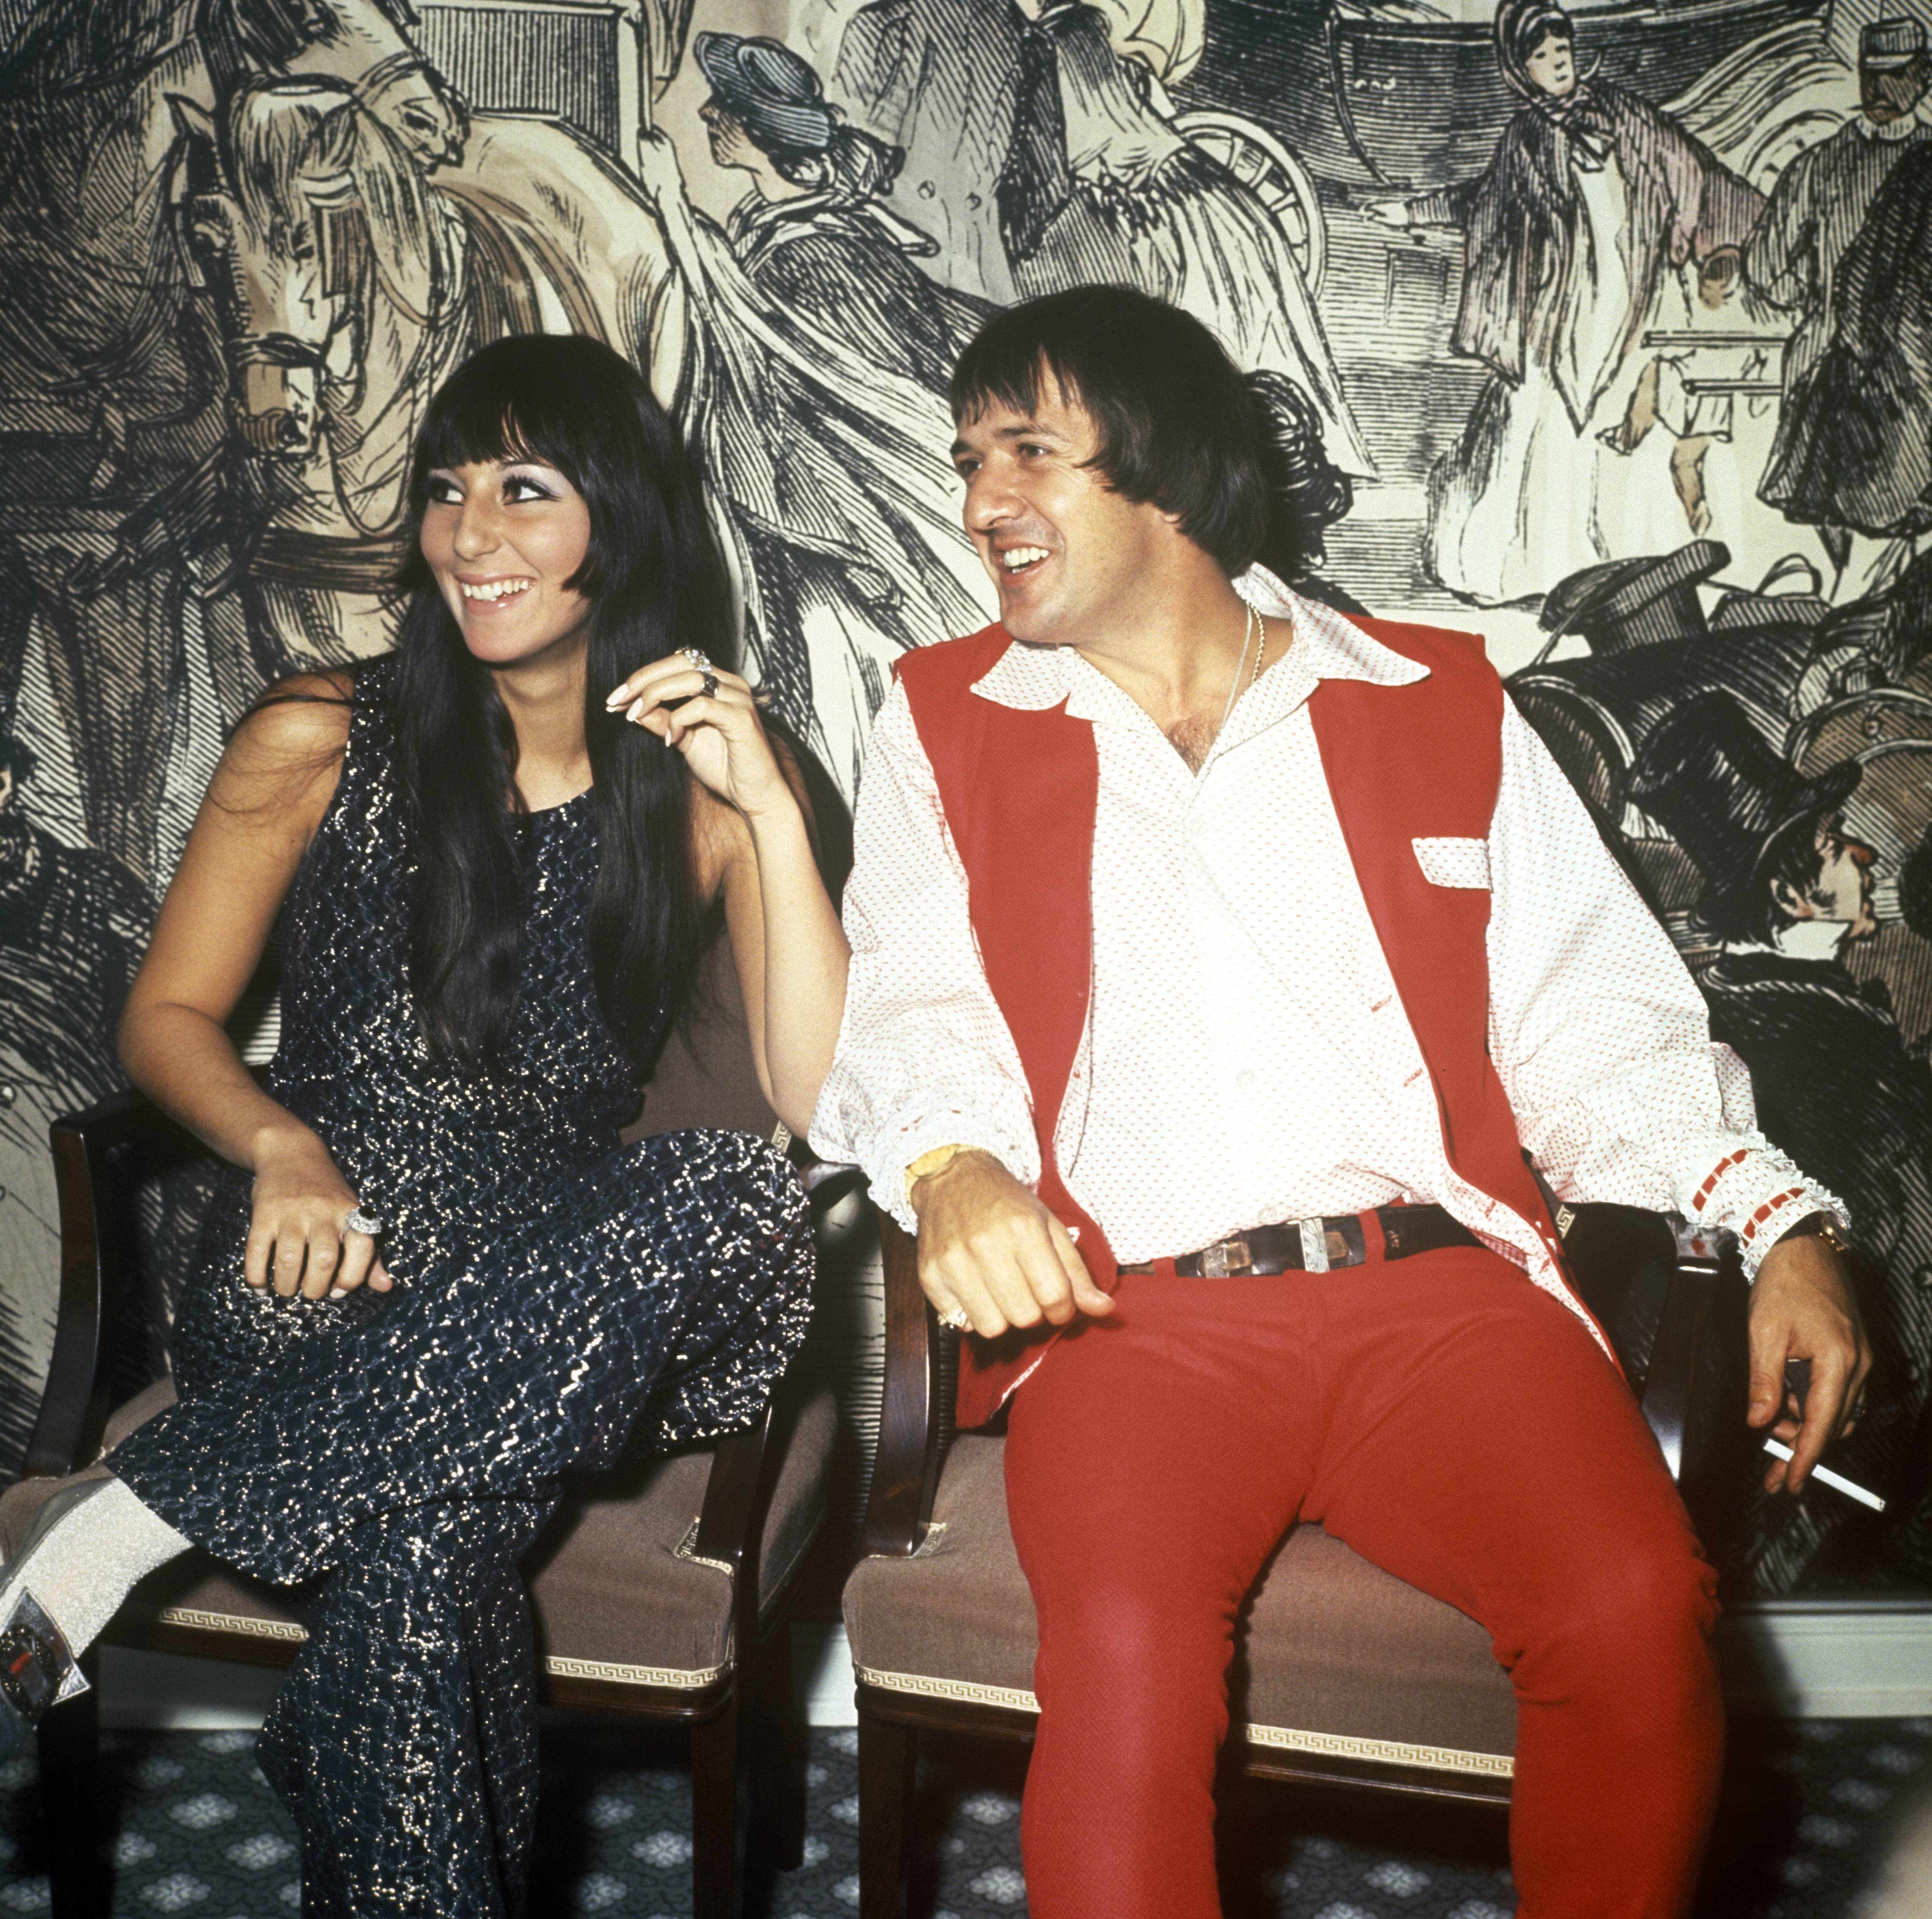 Cher in a black dress and Sonny Bono in a red vest and pants.